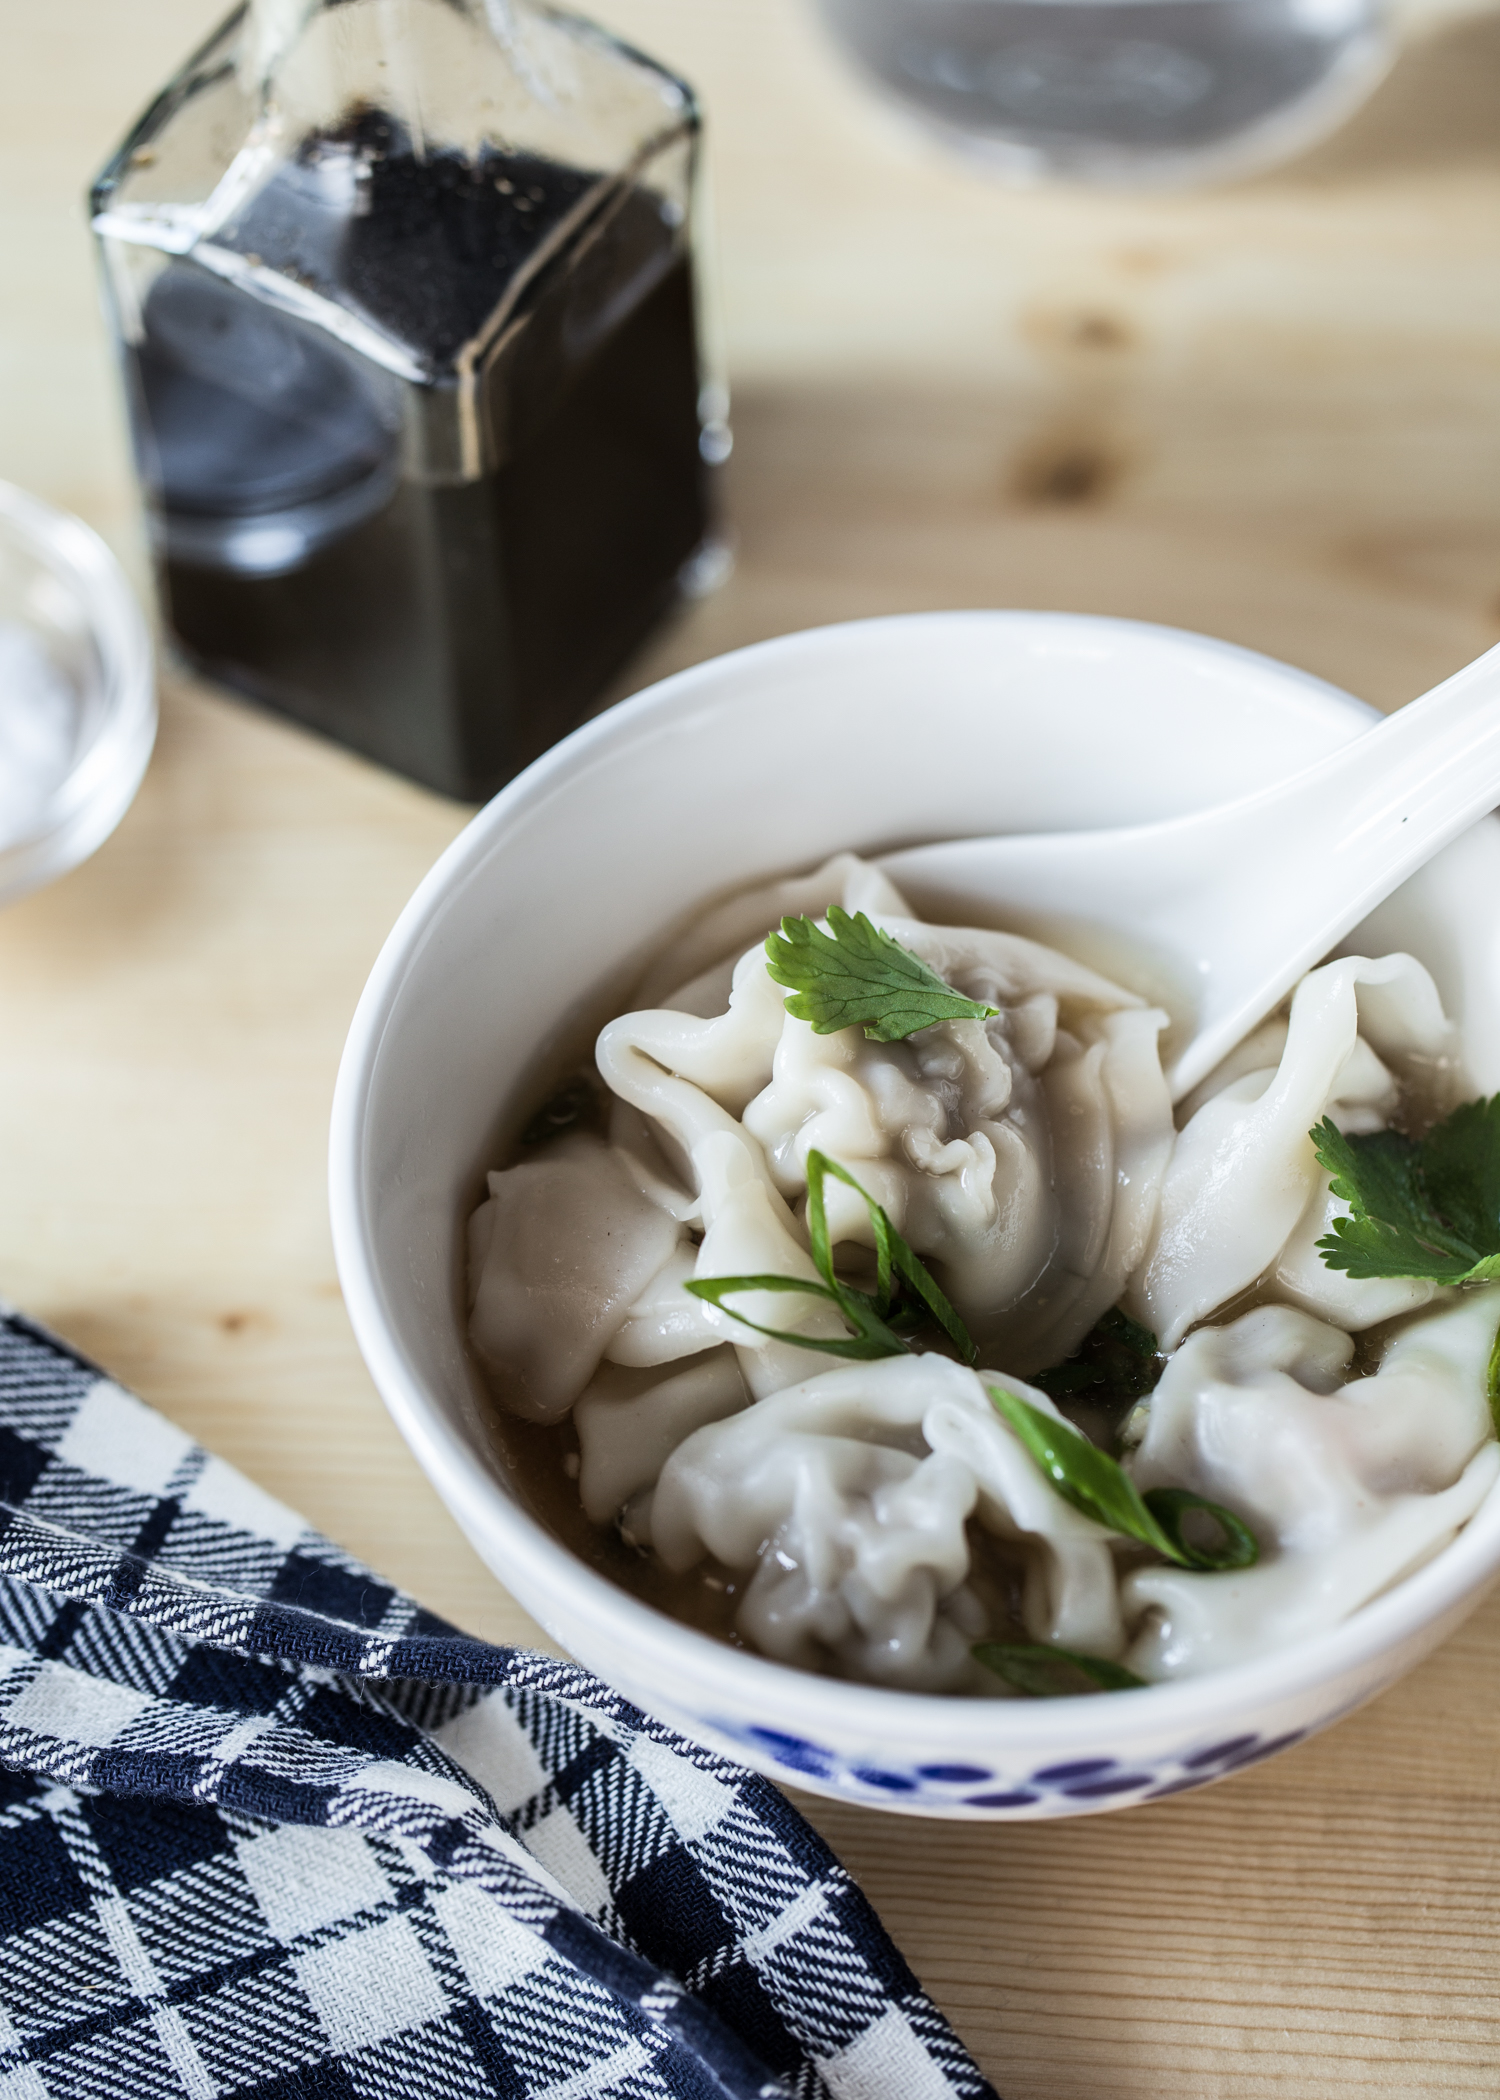 Having a freezer full of wontons to make quick homemade wonton soup is a must.